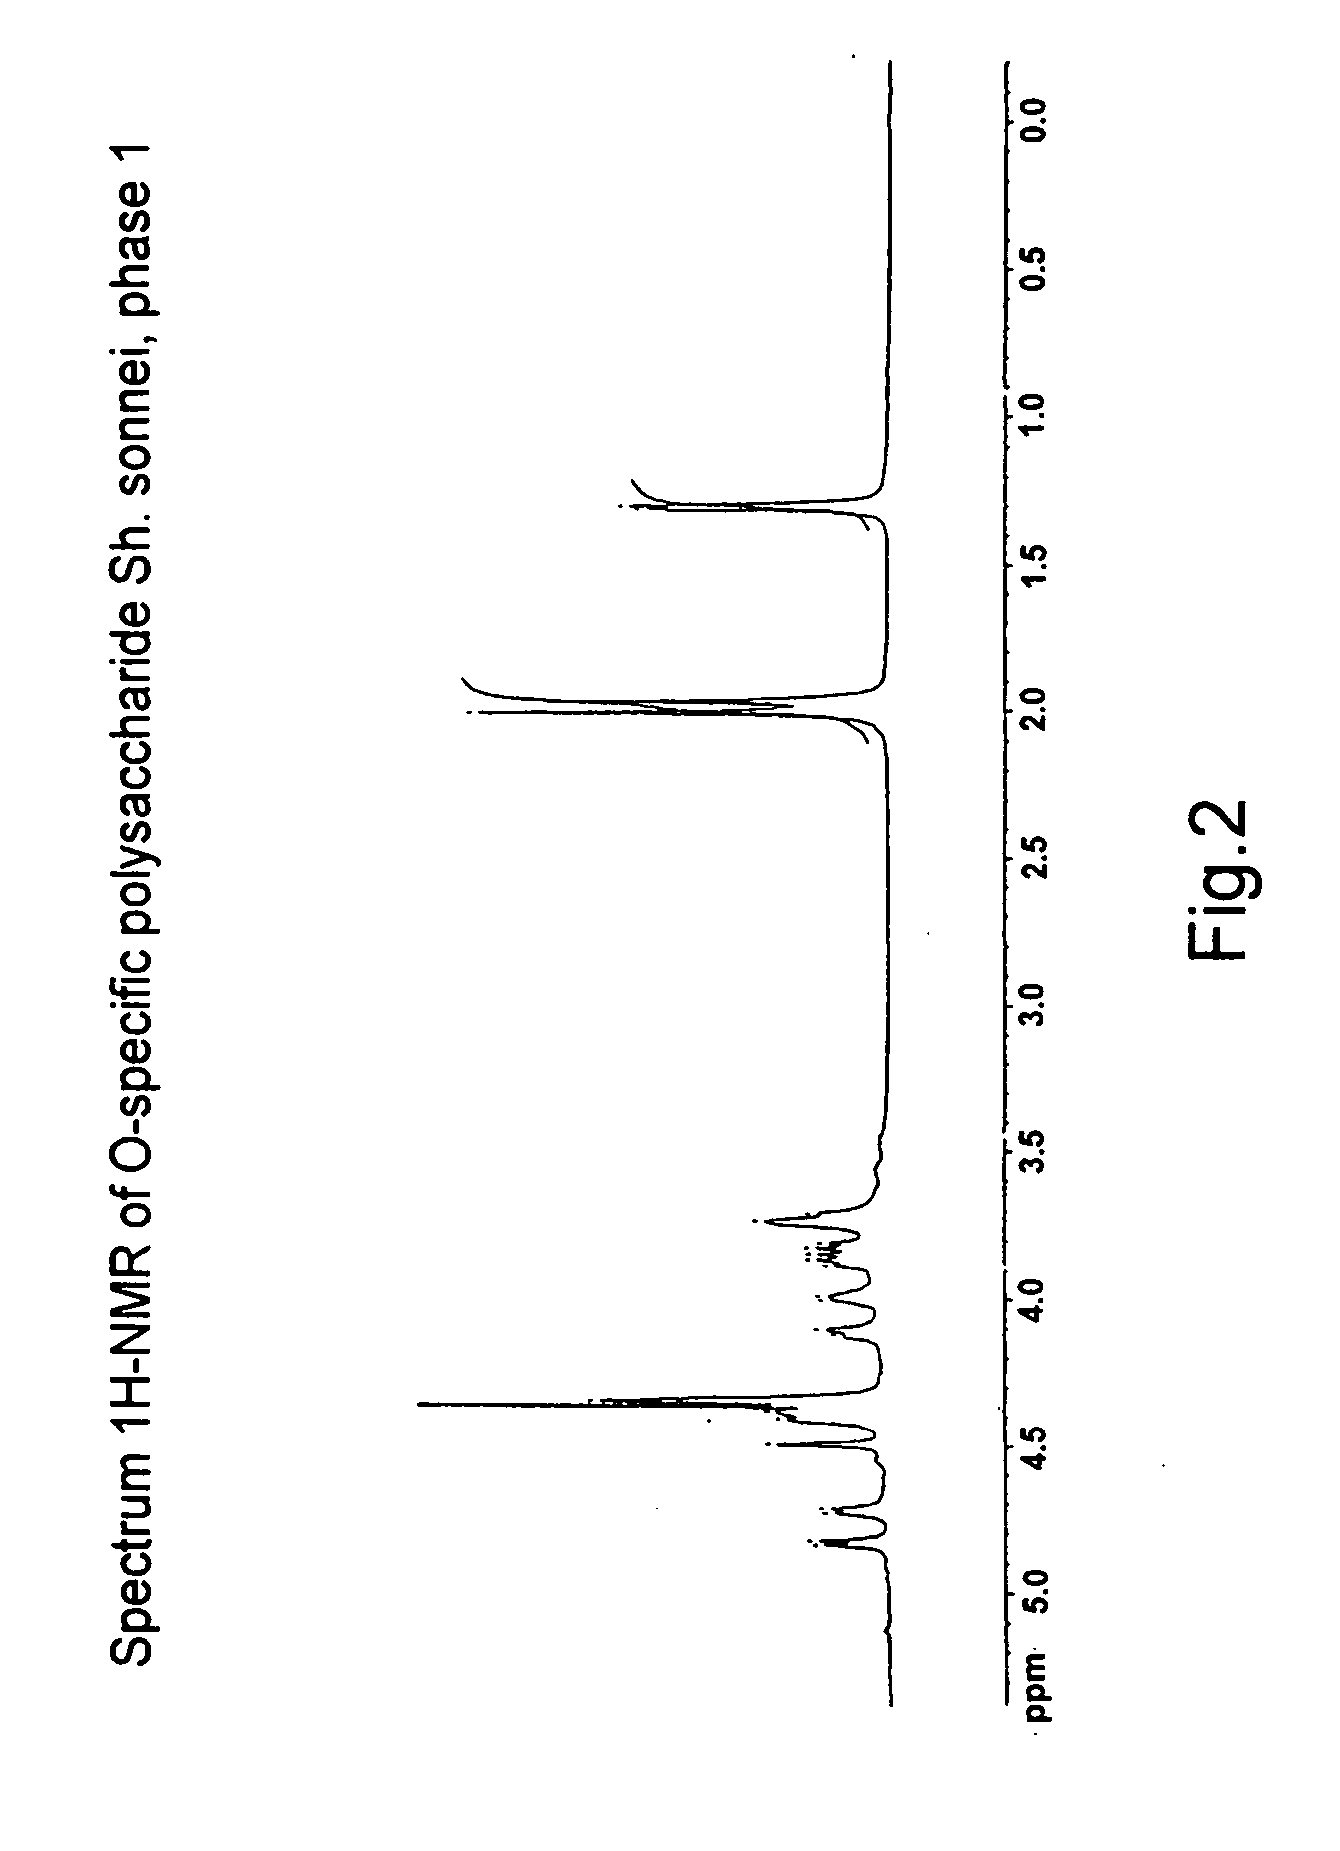 Method of isolating biologically active fraction containing clinically acceptable native S-lipopolysaccharides obtained from bacteria producing endotoxic lipopolysaccharides